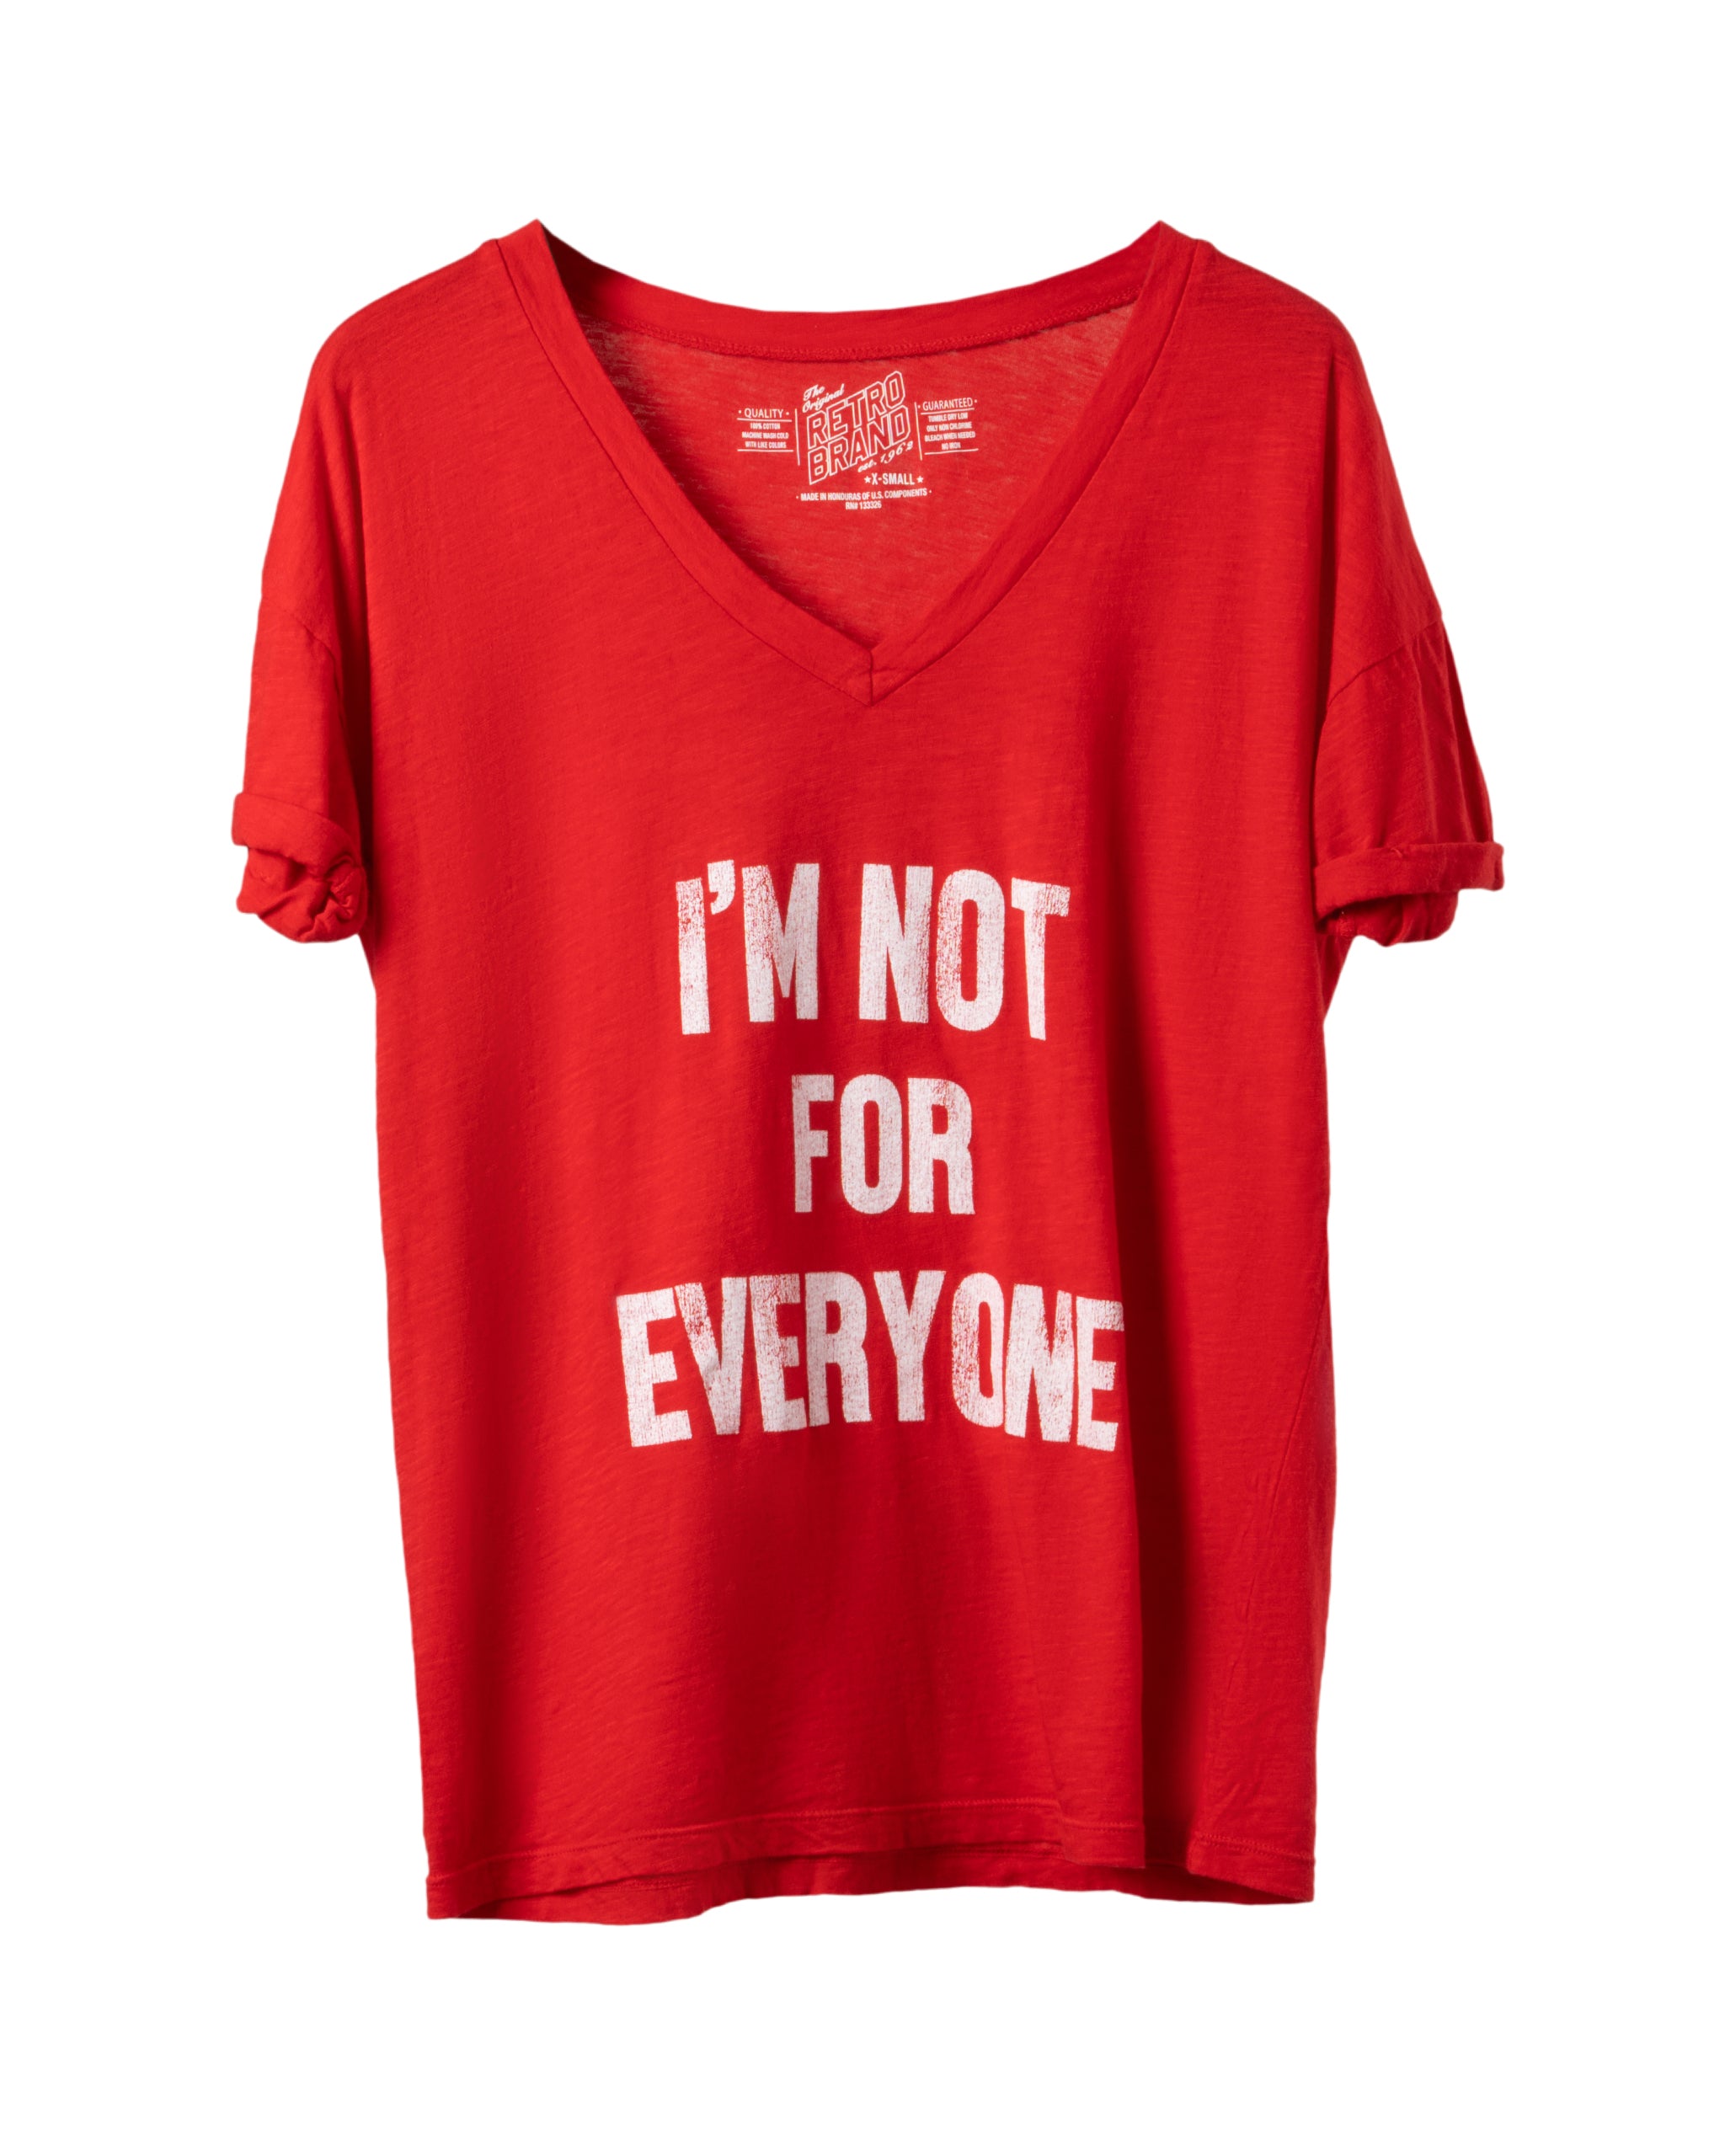 I AM NOT FOR EVERYONE T-SHIRT